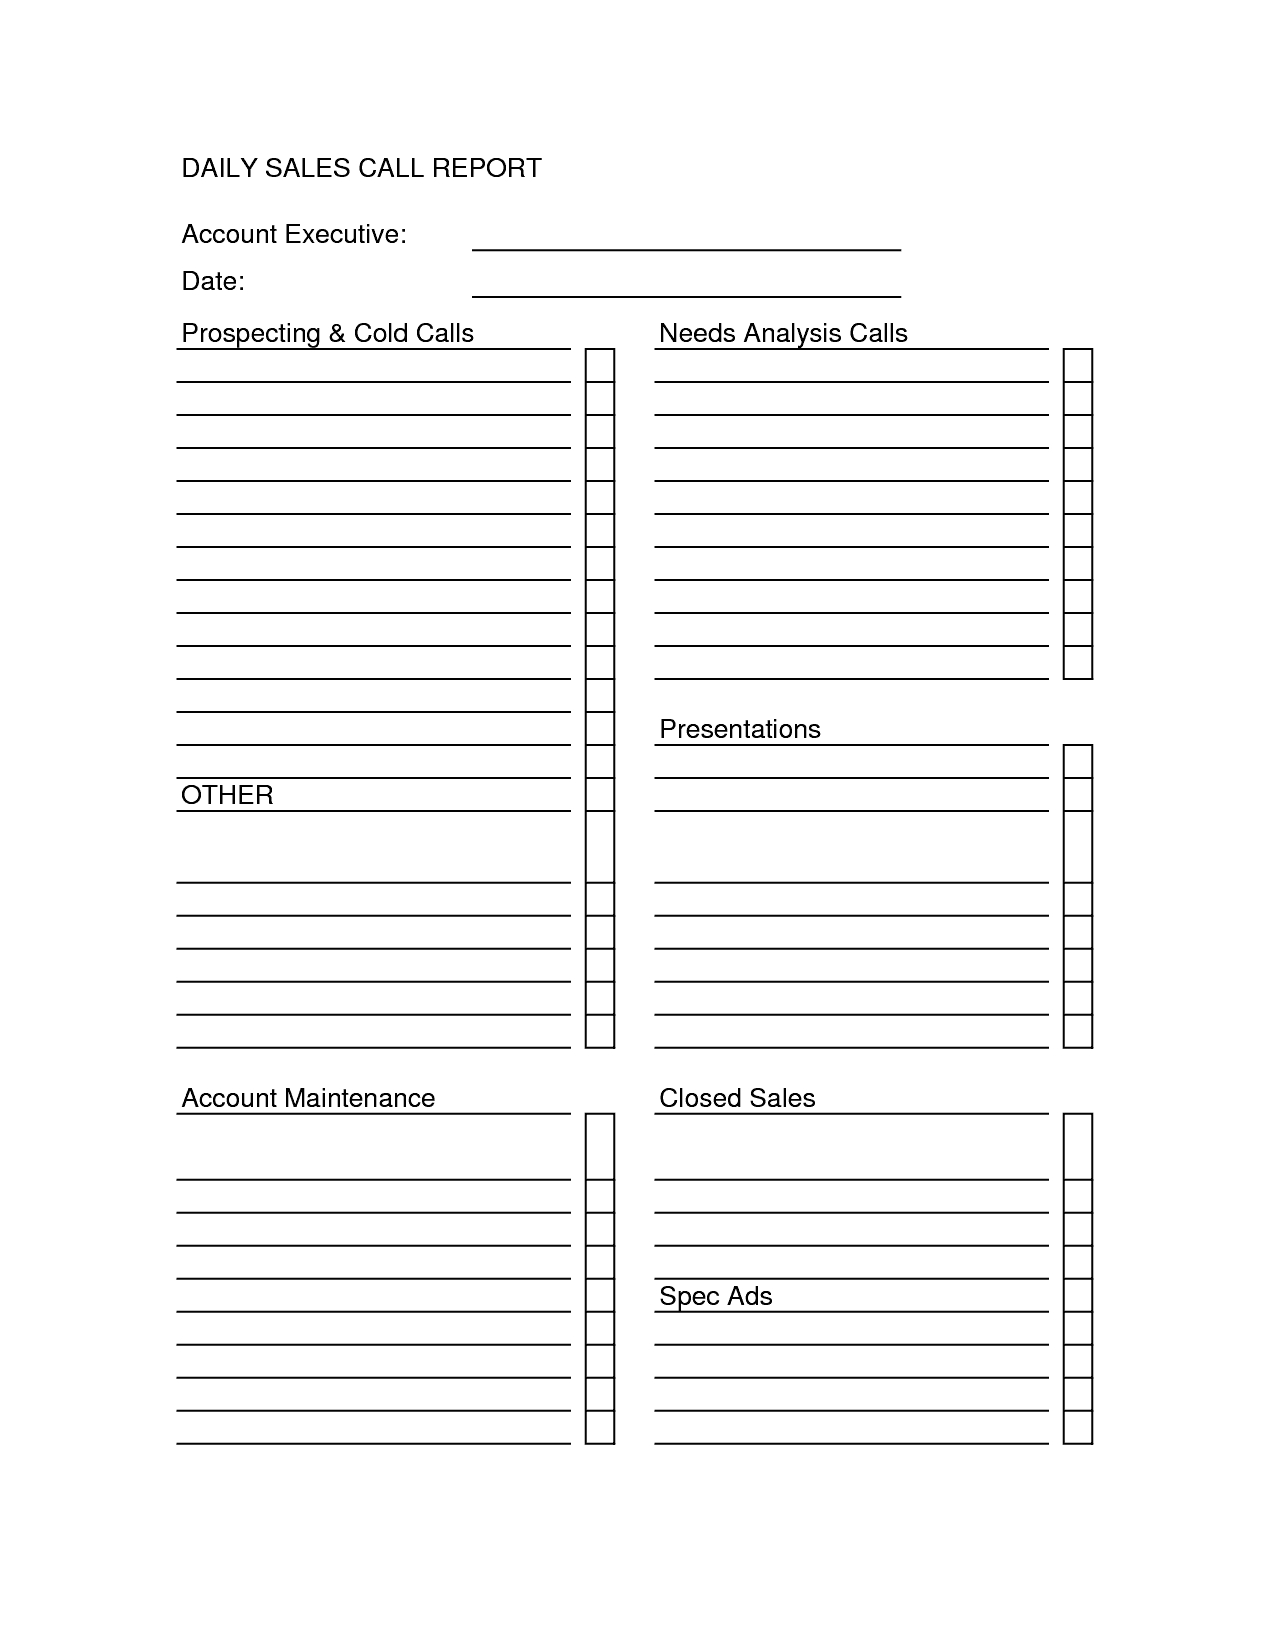 Sales Call Report Templates – Word Excel Fomats Throughout Daily Sales Call Report Template Free Download